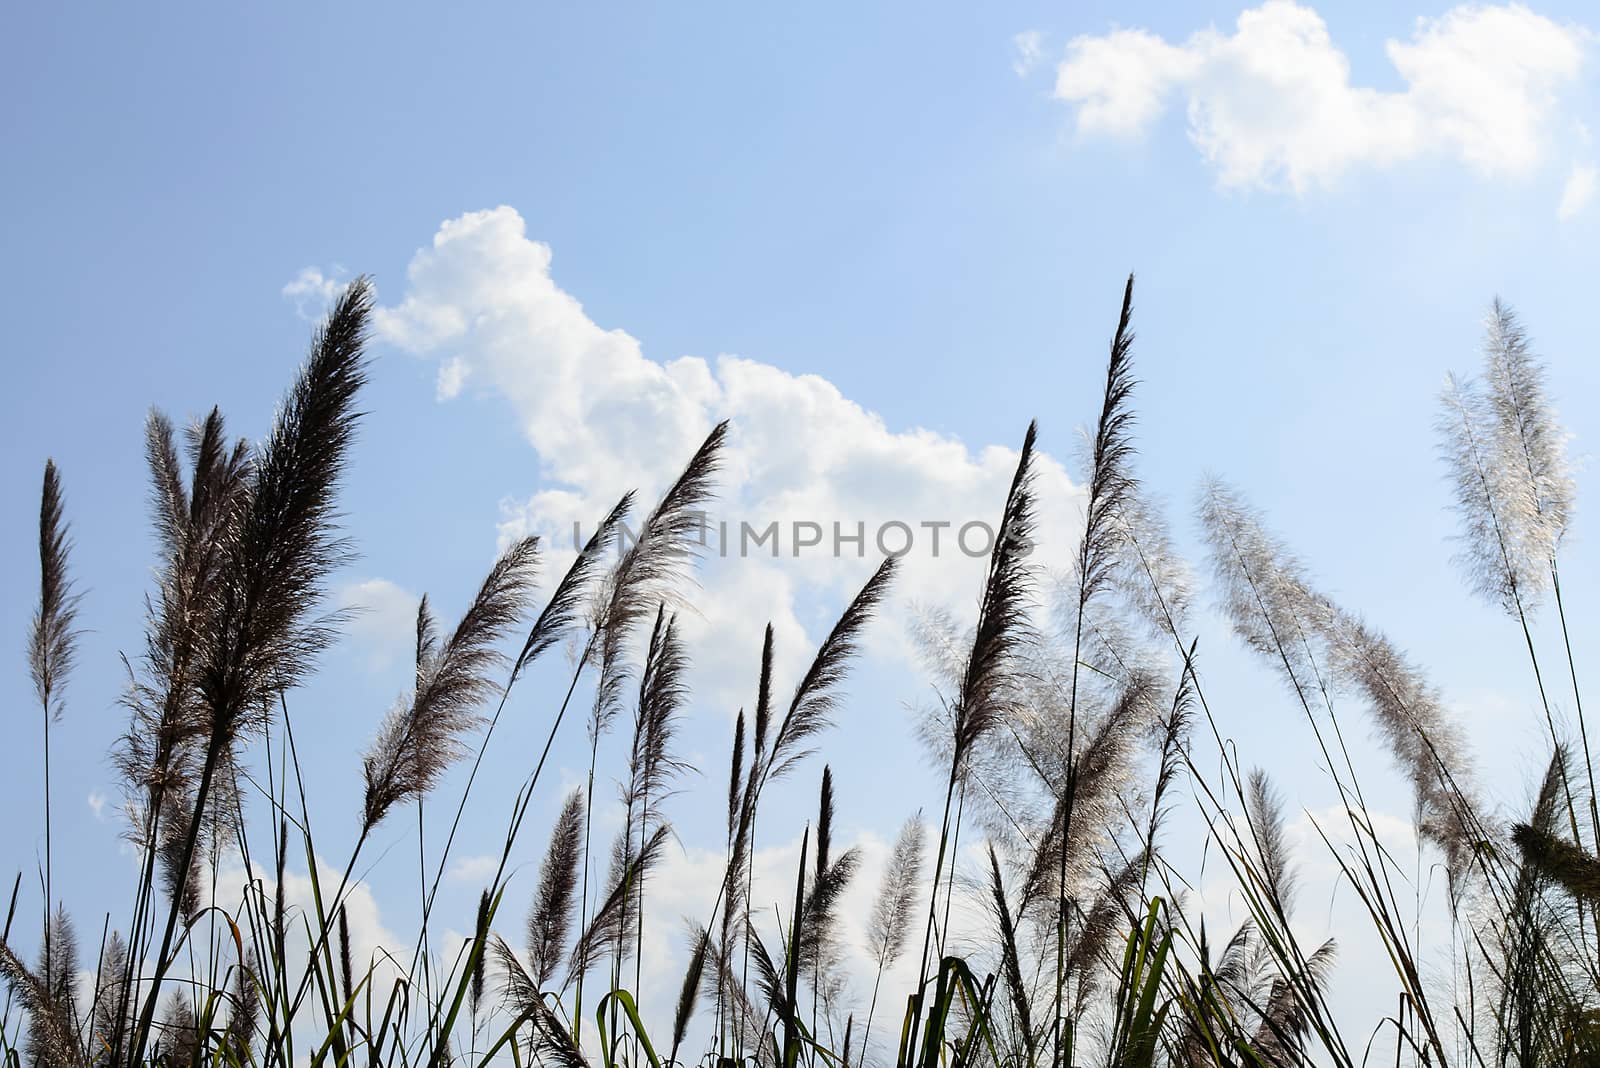 Feather Grass Flower and Blue Sky by kobfujar